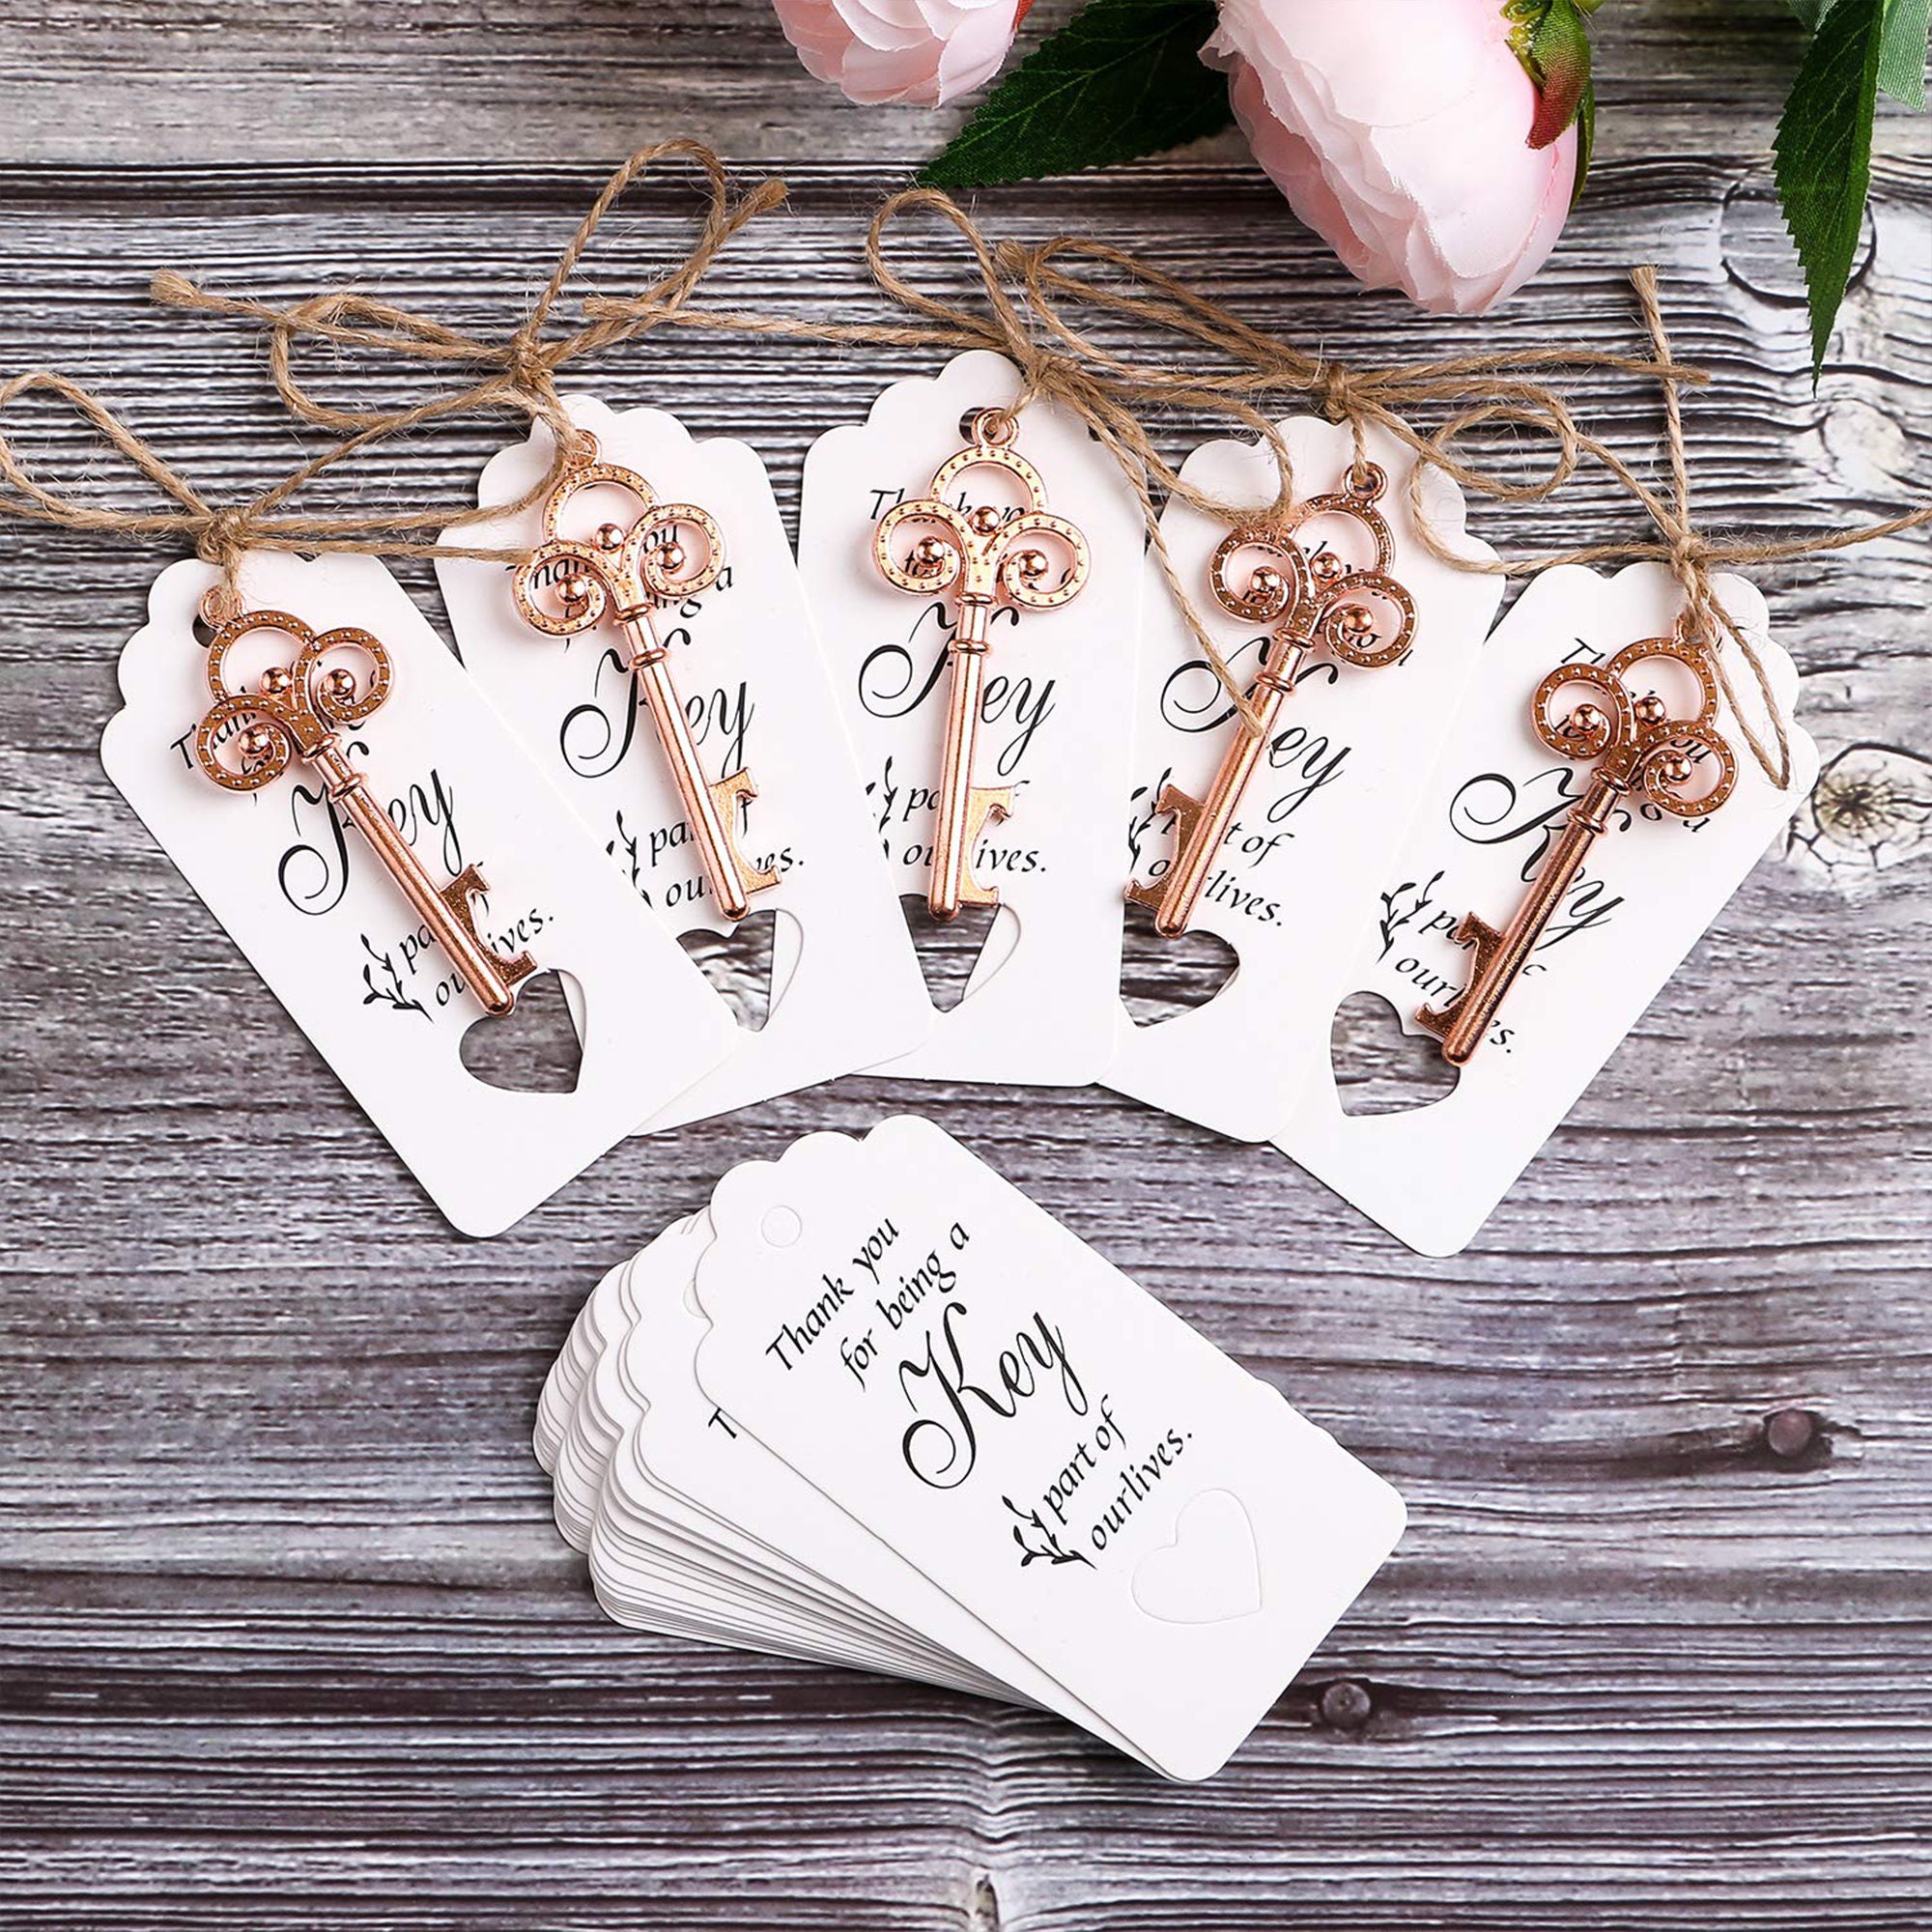 Romantic Wedding Souvenirs Skeleton Bottle Opener Tags Favor Guest Party Gifts 